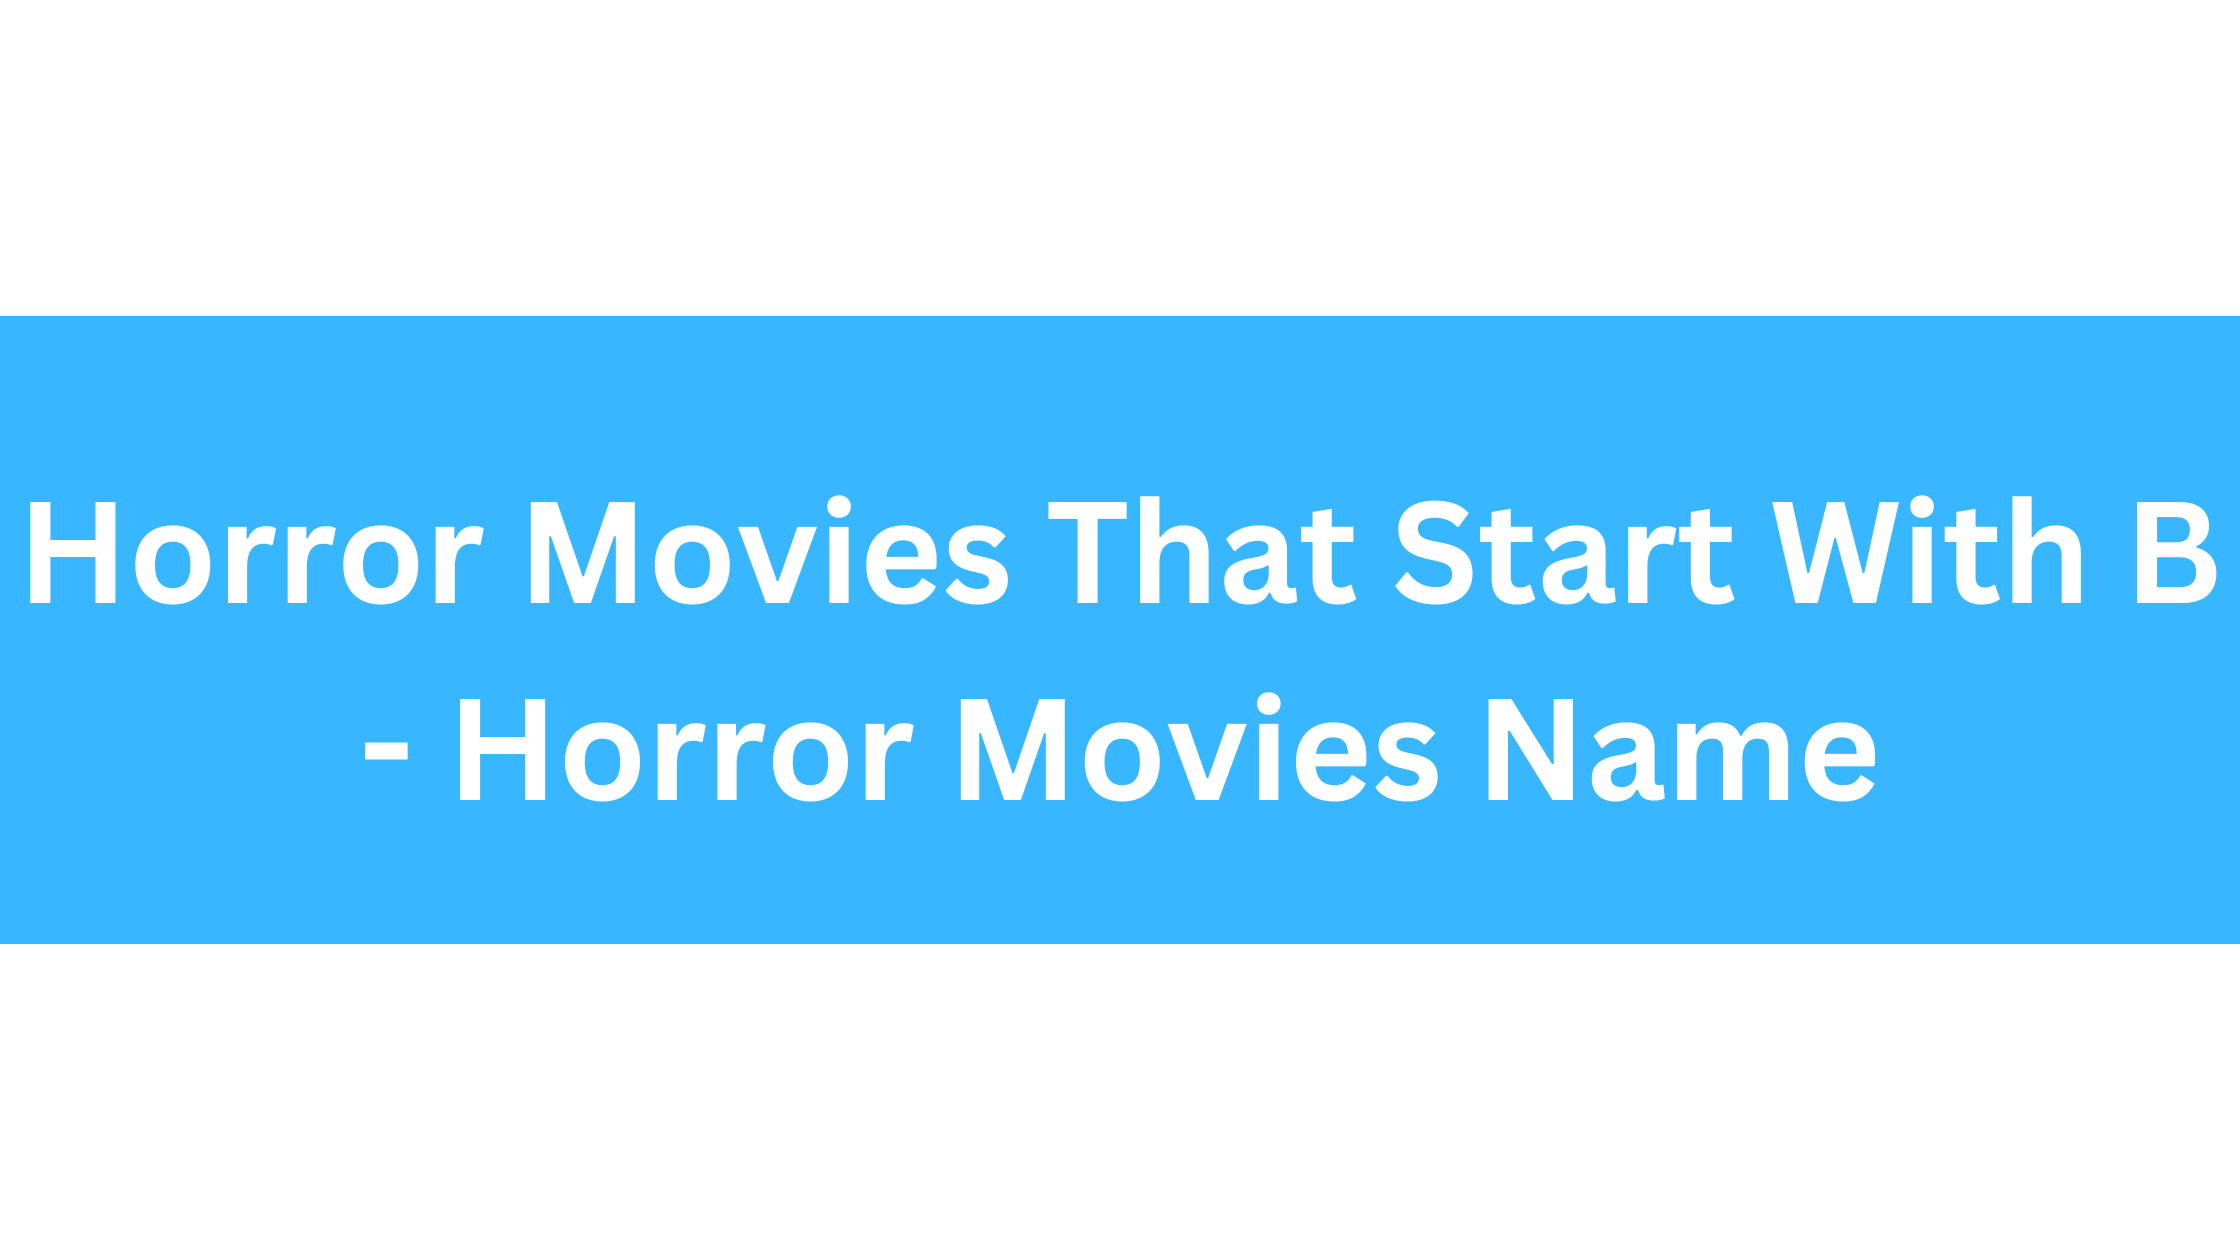 Horror Movies That Start With B